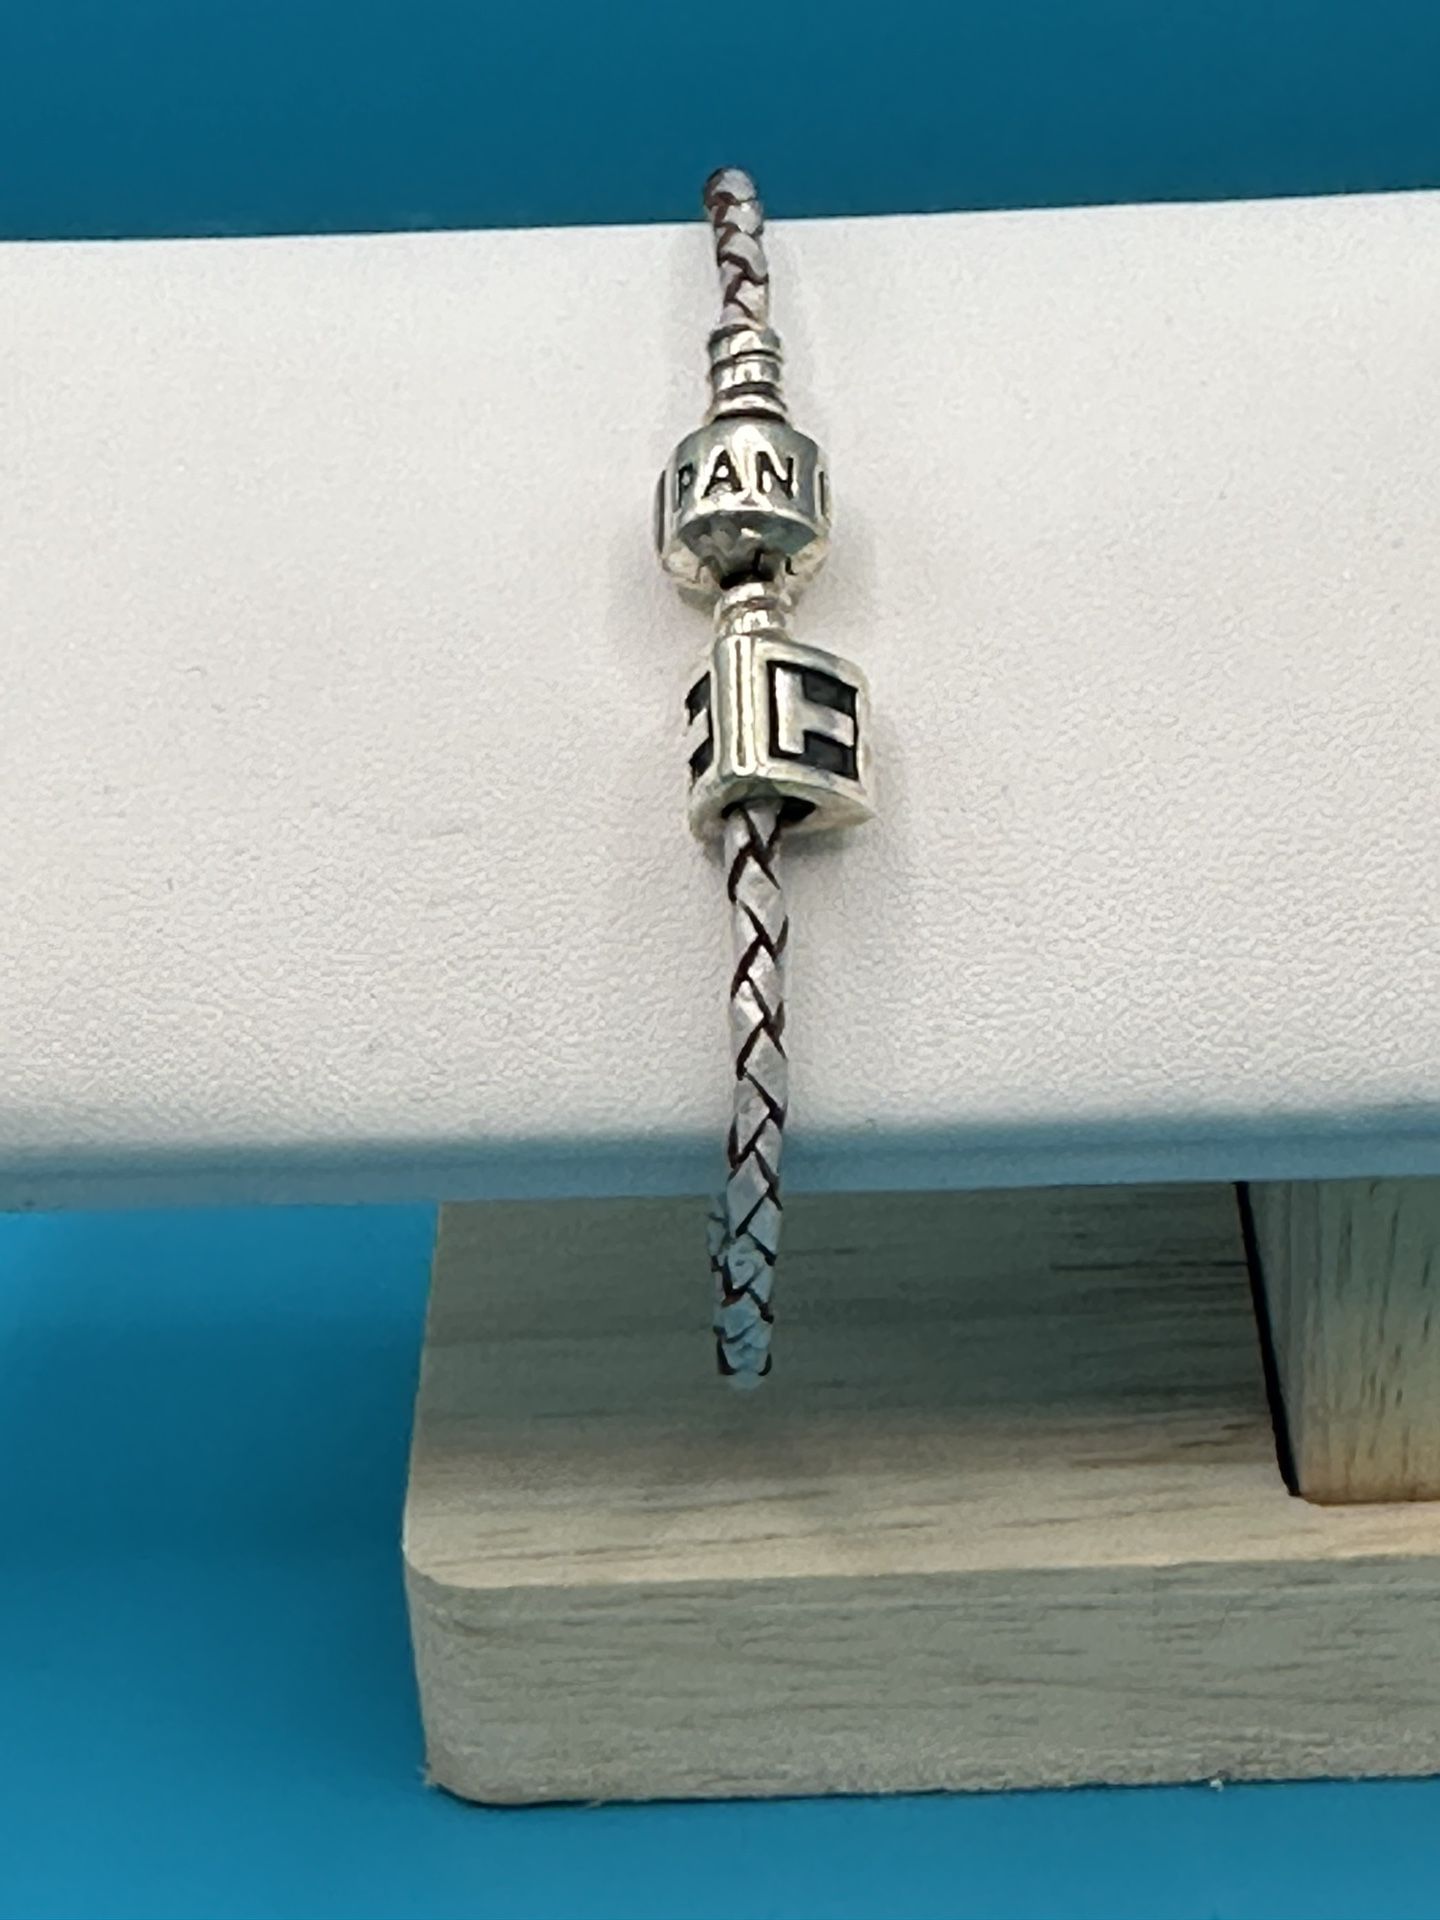 Pandora Sterling Silver Braided Bracelet With T Triangle Charm SZ 6 3/4” & Weighs 7.68 Grams Good Condition 